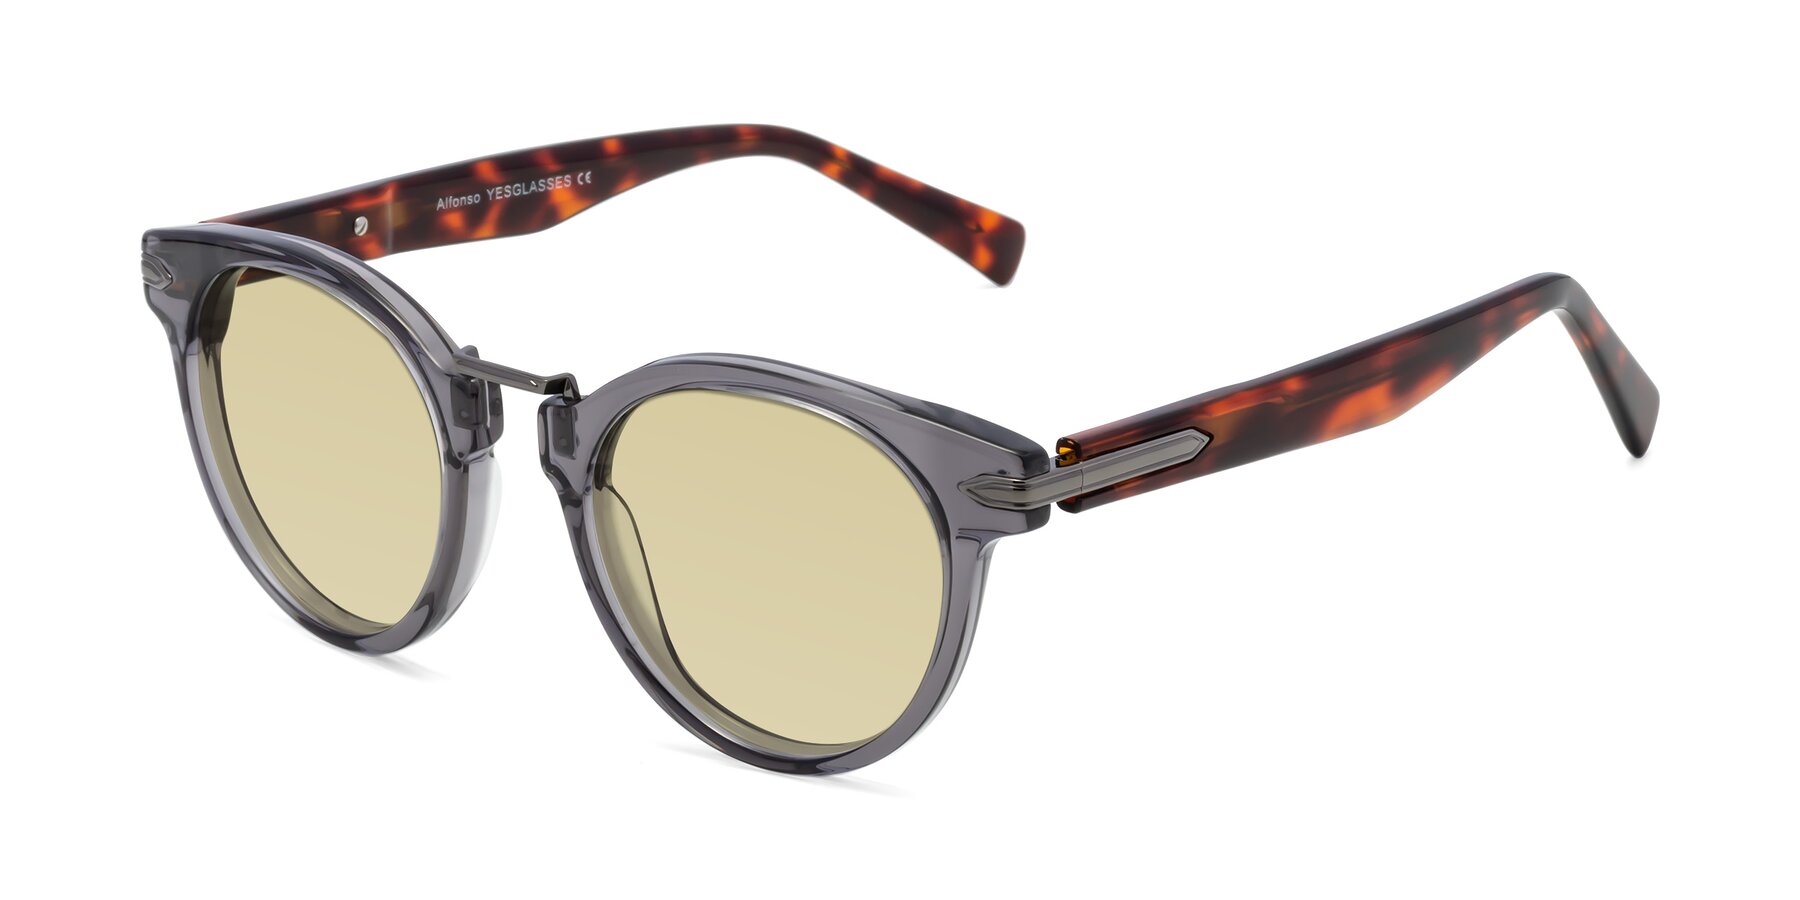 Angle of Alfonso in Gray /Tortoise with Light Champagne Tinted Lenses